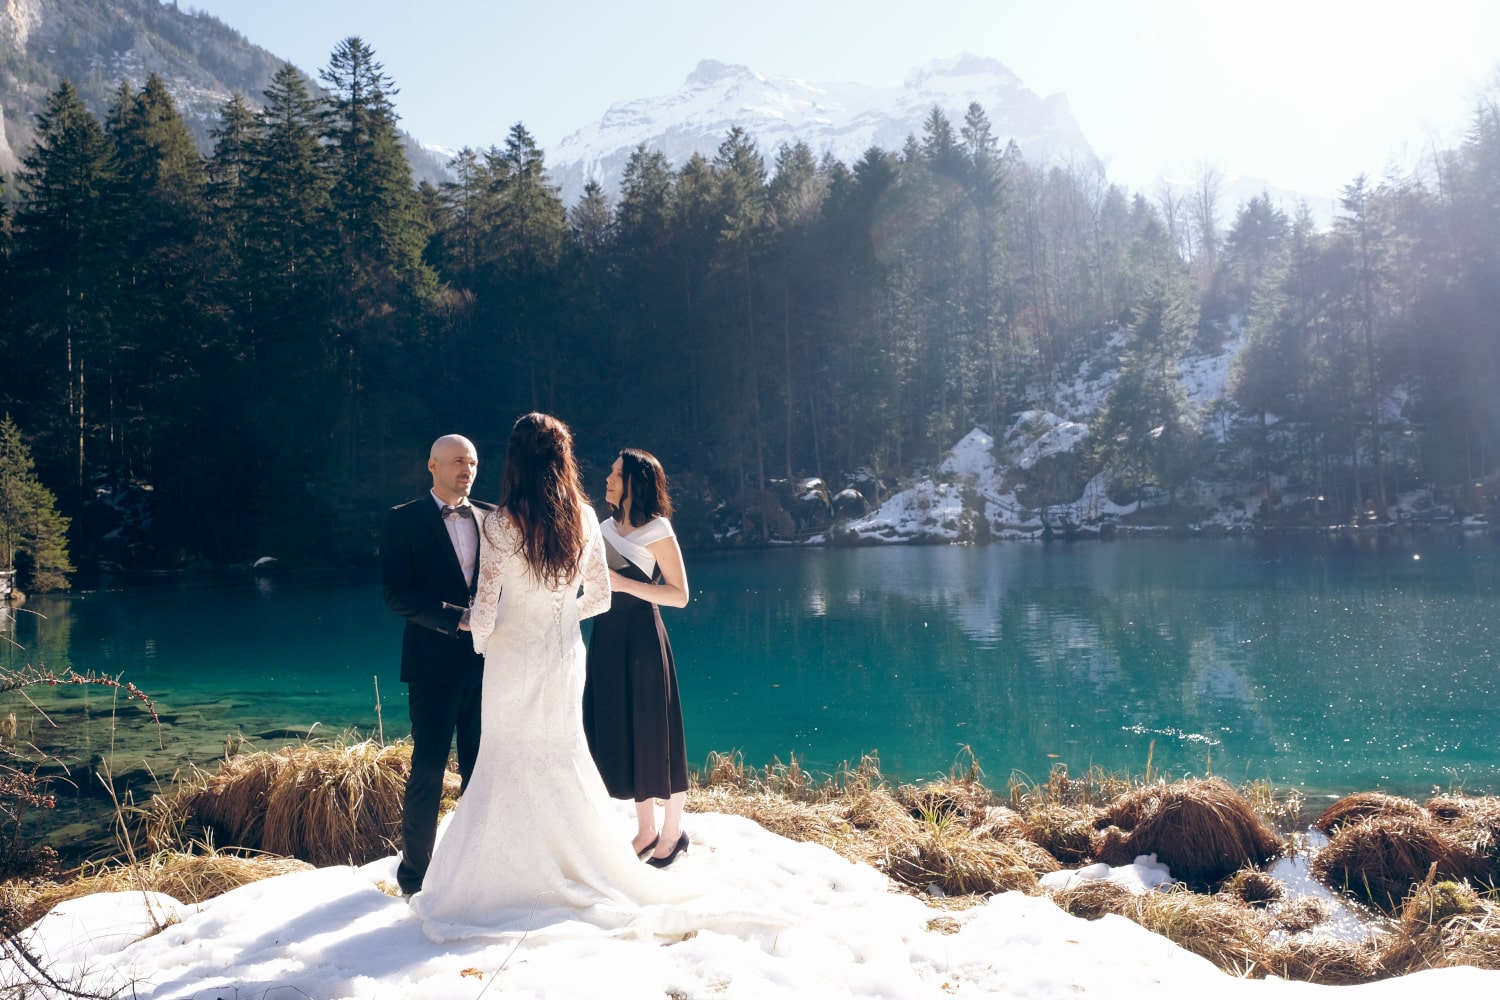 Blausee, one of the best spots for your elopement in Switzerland